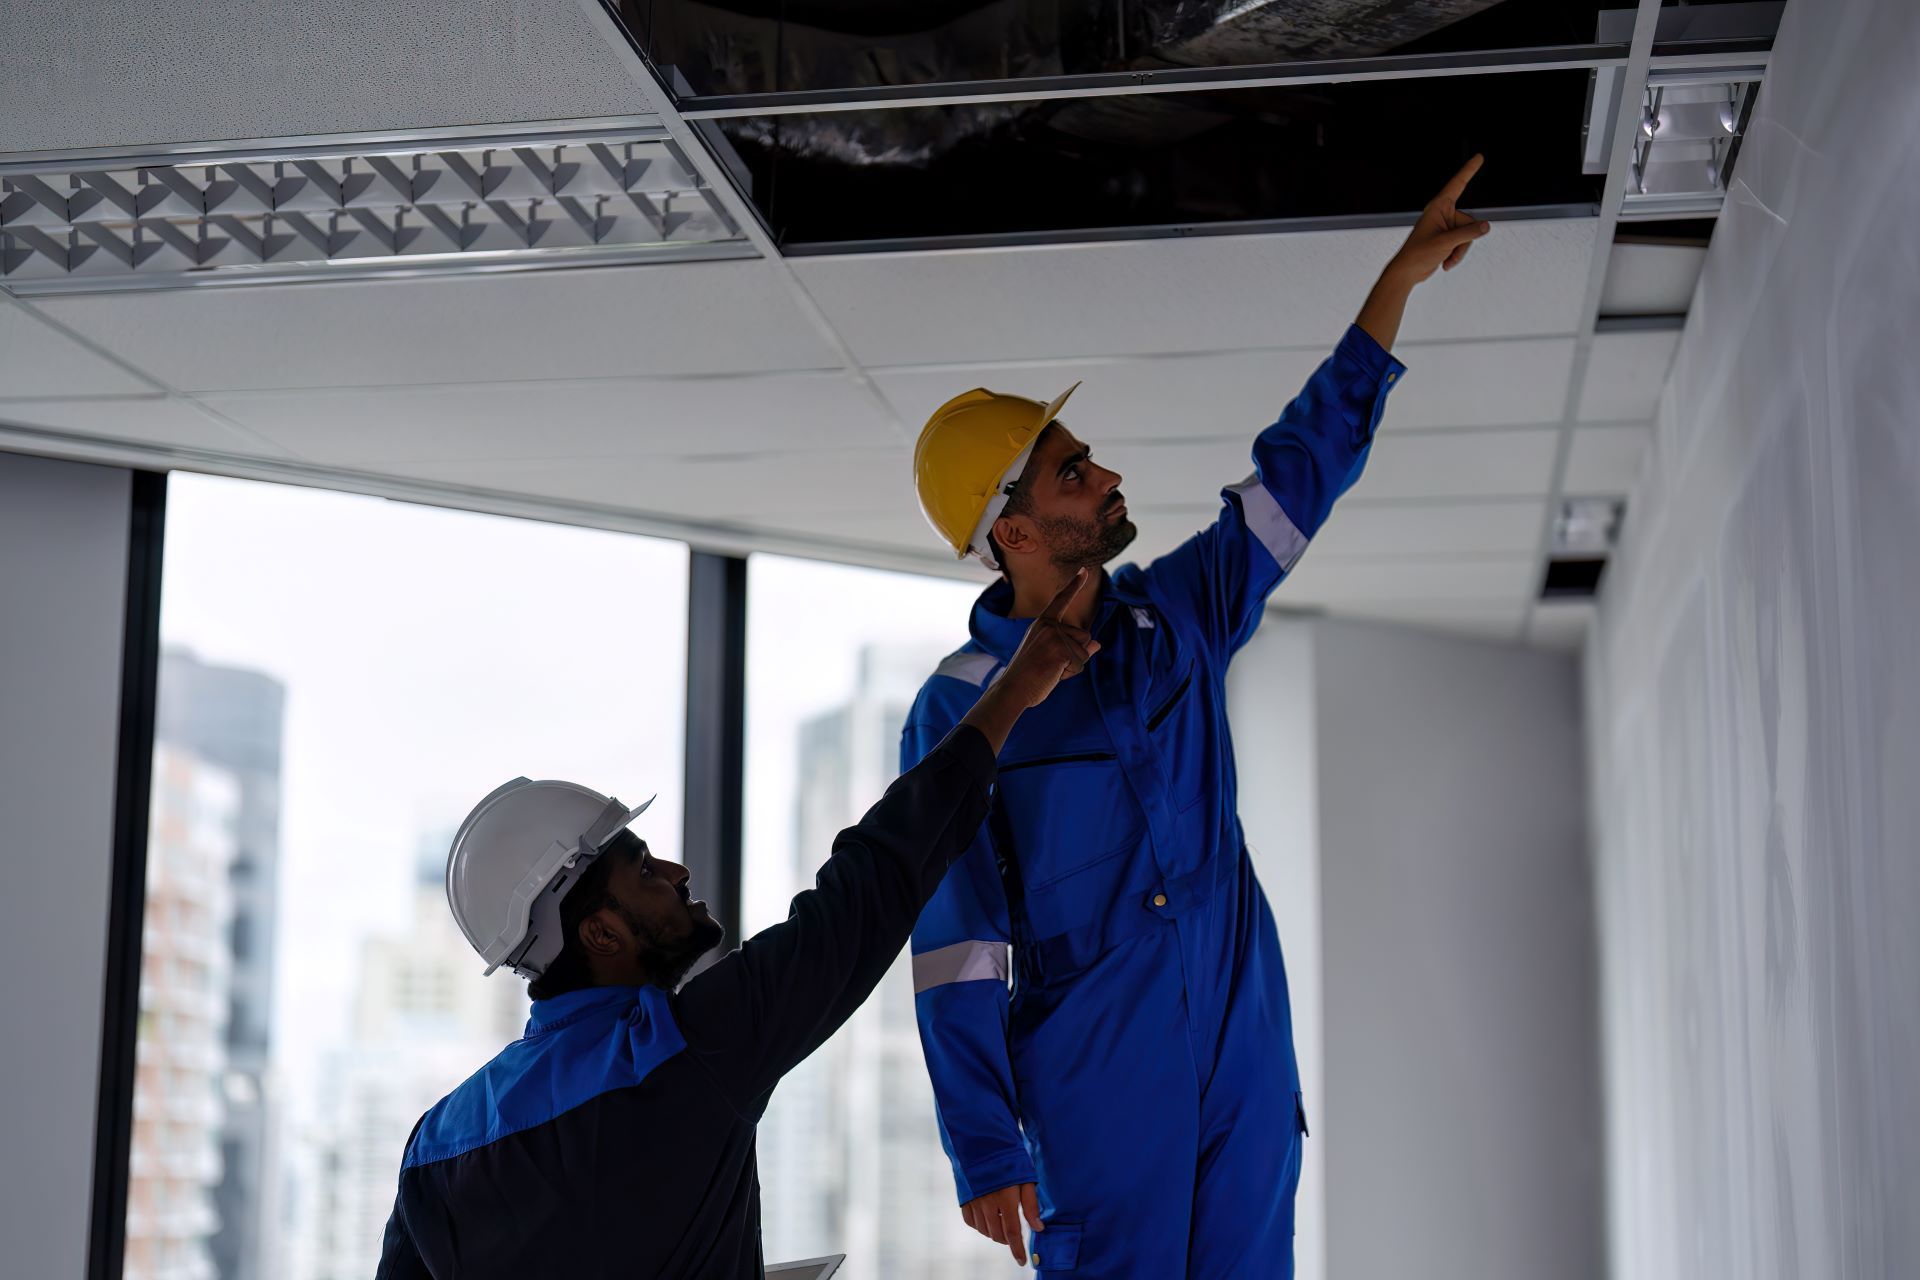 two men examine ductwork in ceiling